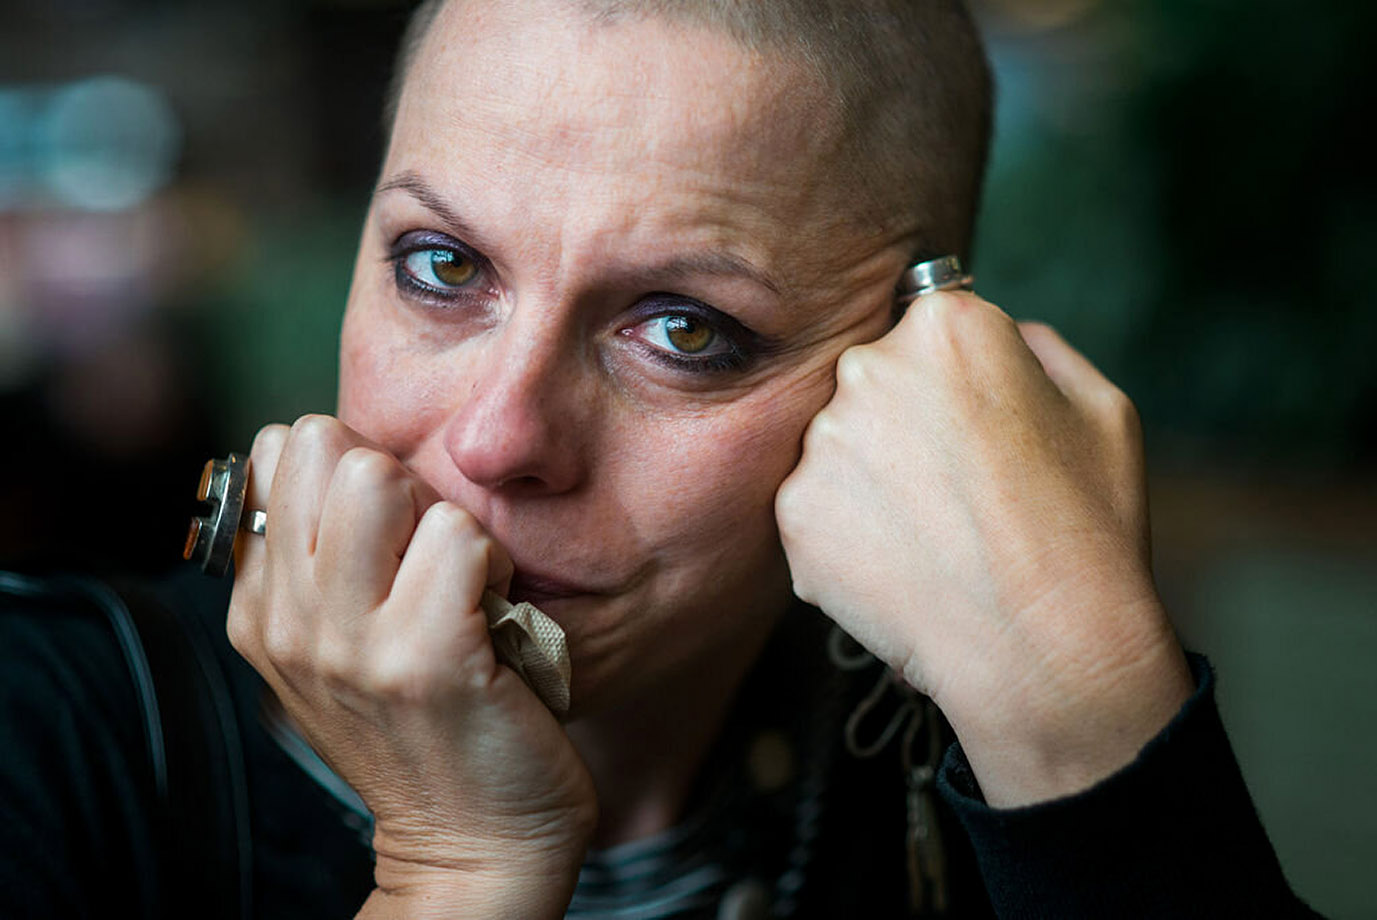 PHOTO: After Anna Rathkopf was diagnosed with an aggressive form of breast cancer at age 37, her husband, Jordan Rathkopf, who is a professional photographer, documented their journey in a series of powerful photos to show the realities of caregiving.